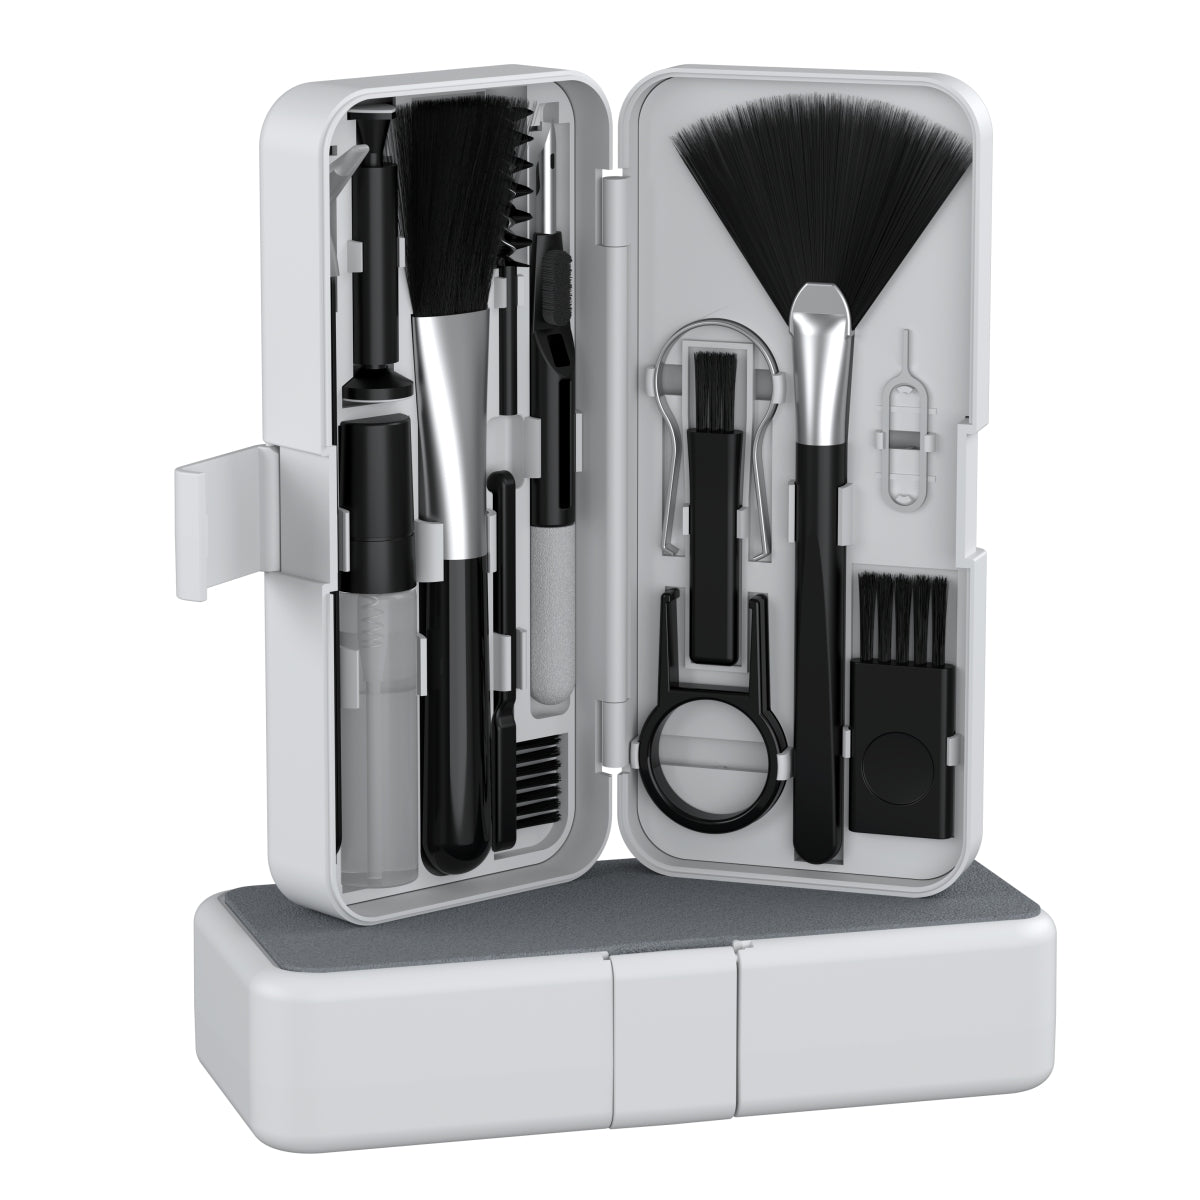 5-in-1 Keyboard Cleaning Kit: Get a Spotless Keyboard & More with Our  Multifunction Brush Set!